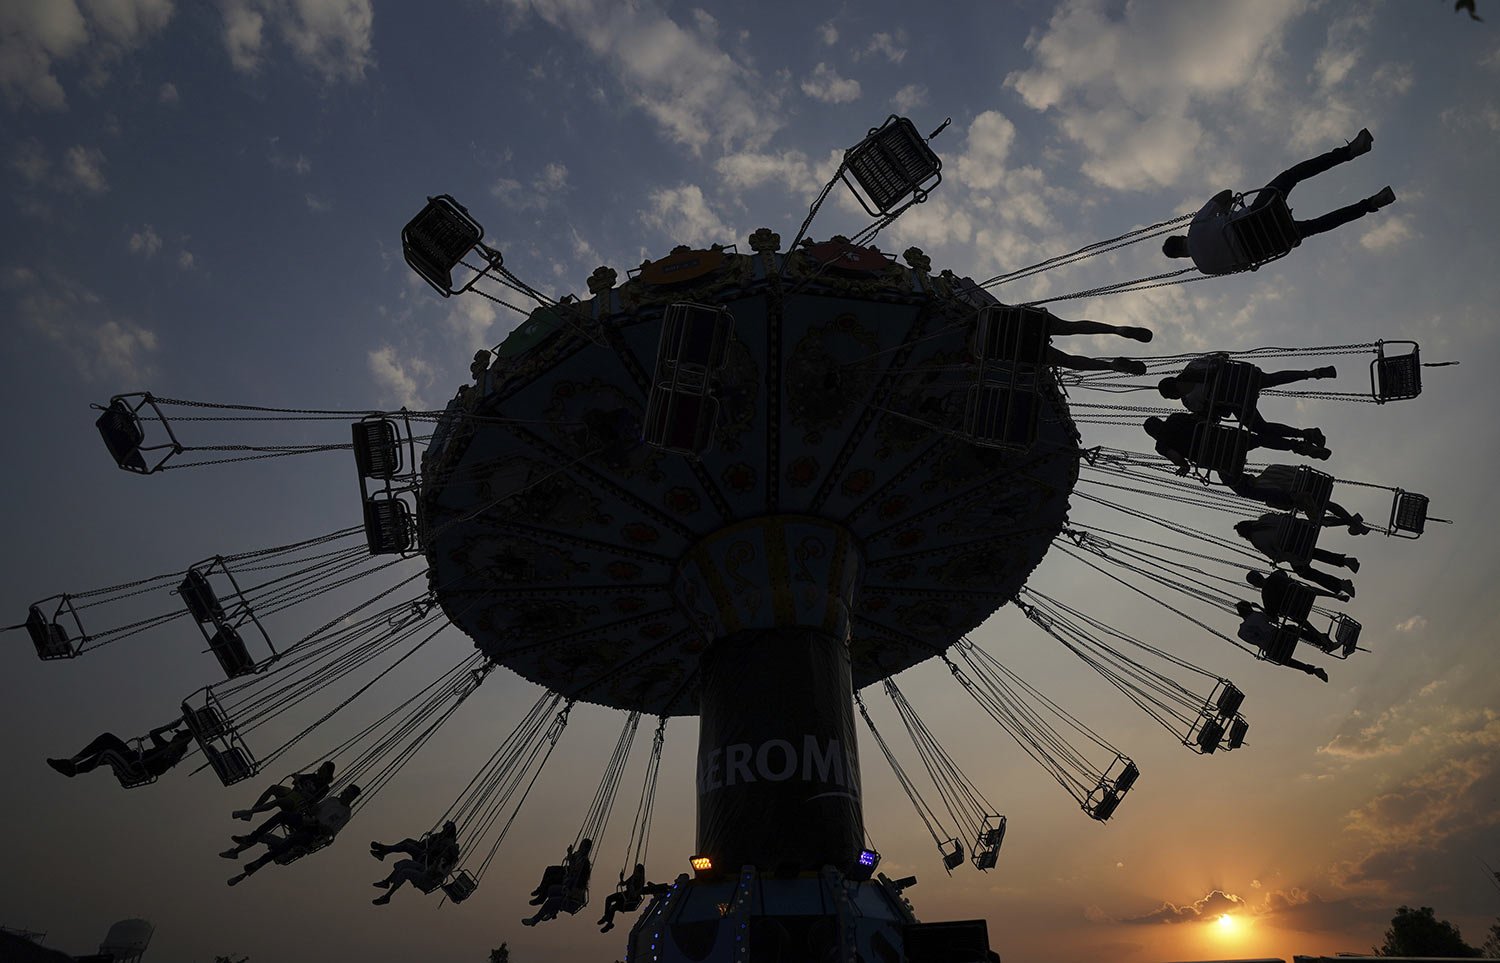  People ride a swing carousel at the Ceremonia music festival in Mexico City, April 2, 2022. (AP Photo/Fernando Llano) 